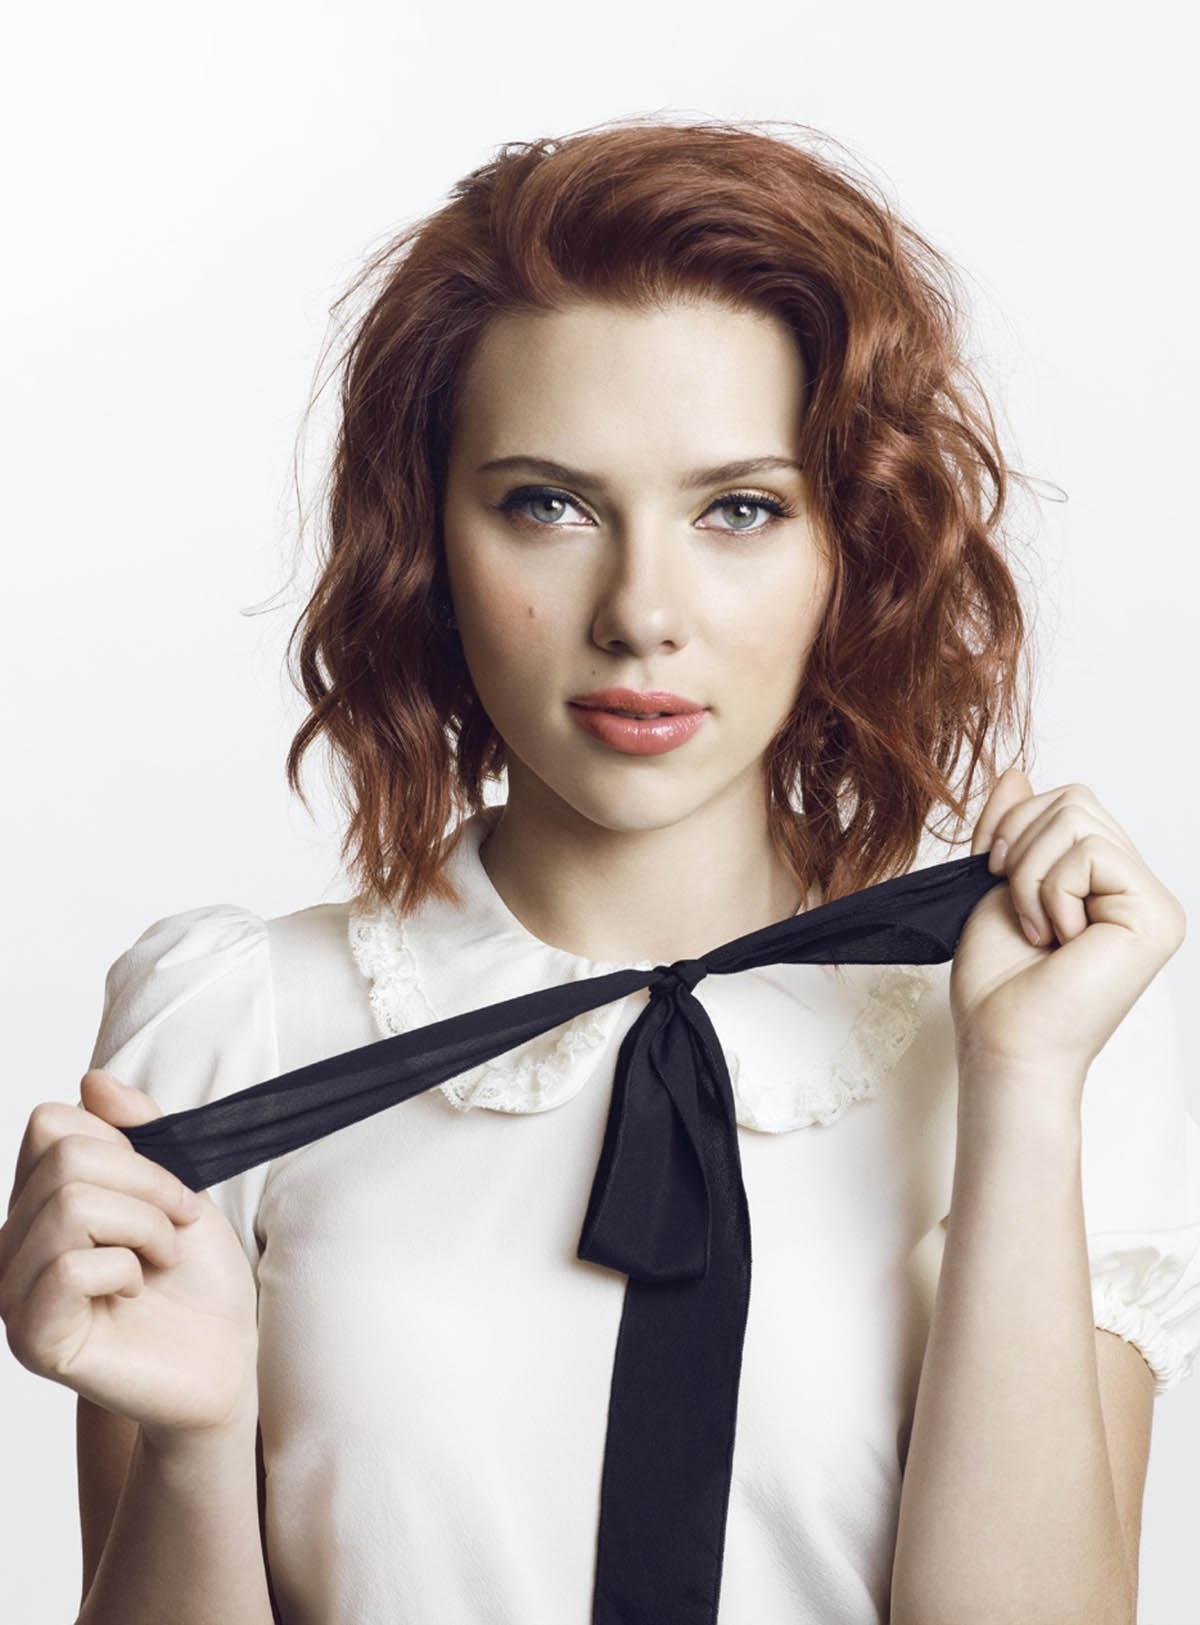 All About Movie Actress Scarlett Johansson - HubPages